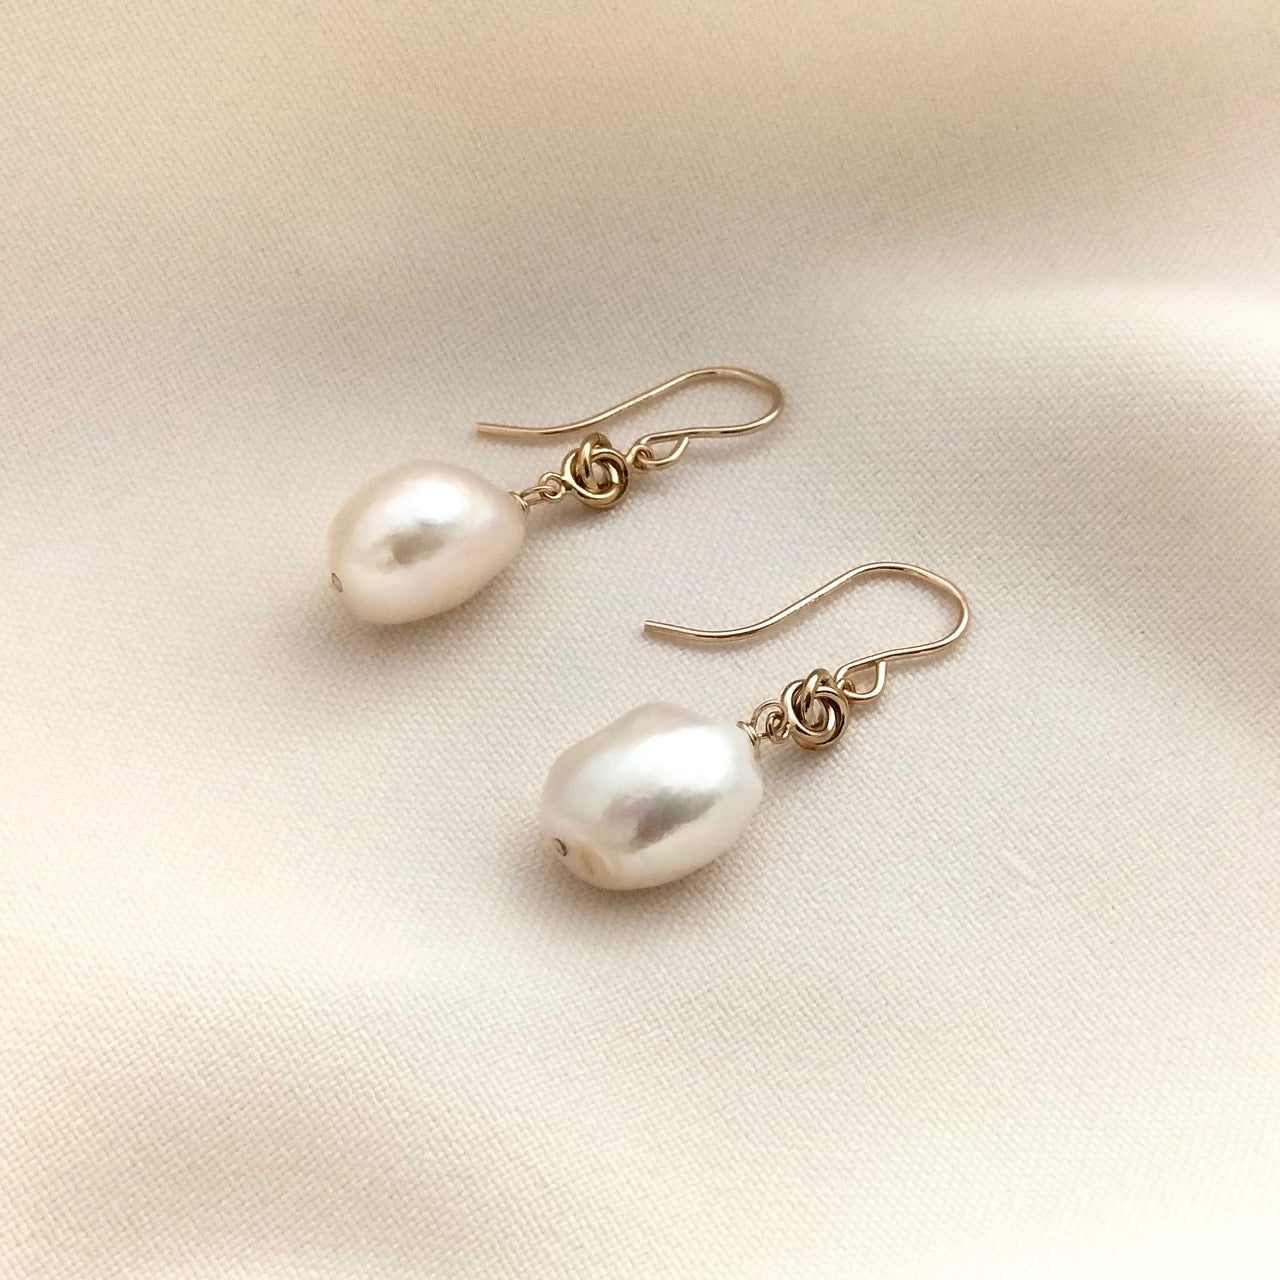 Gold love knot and pearl earrings